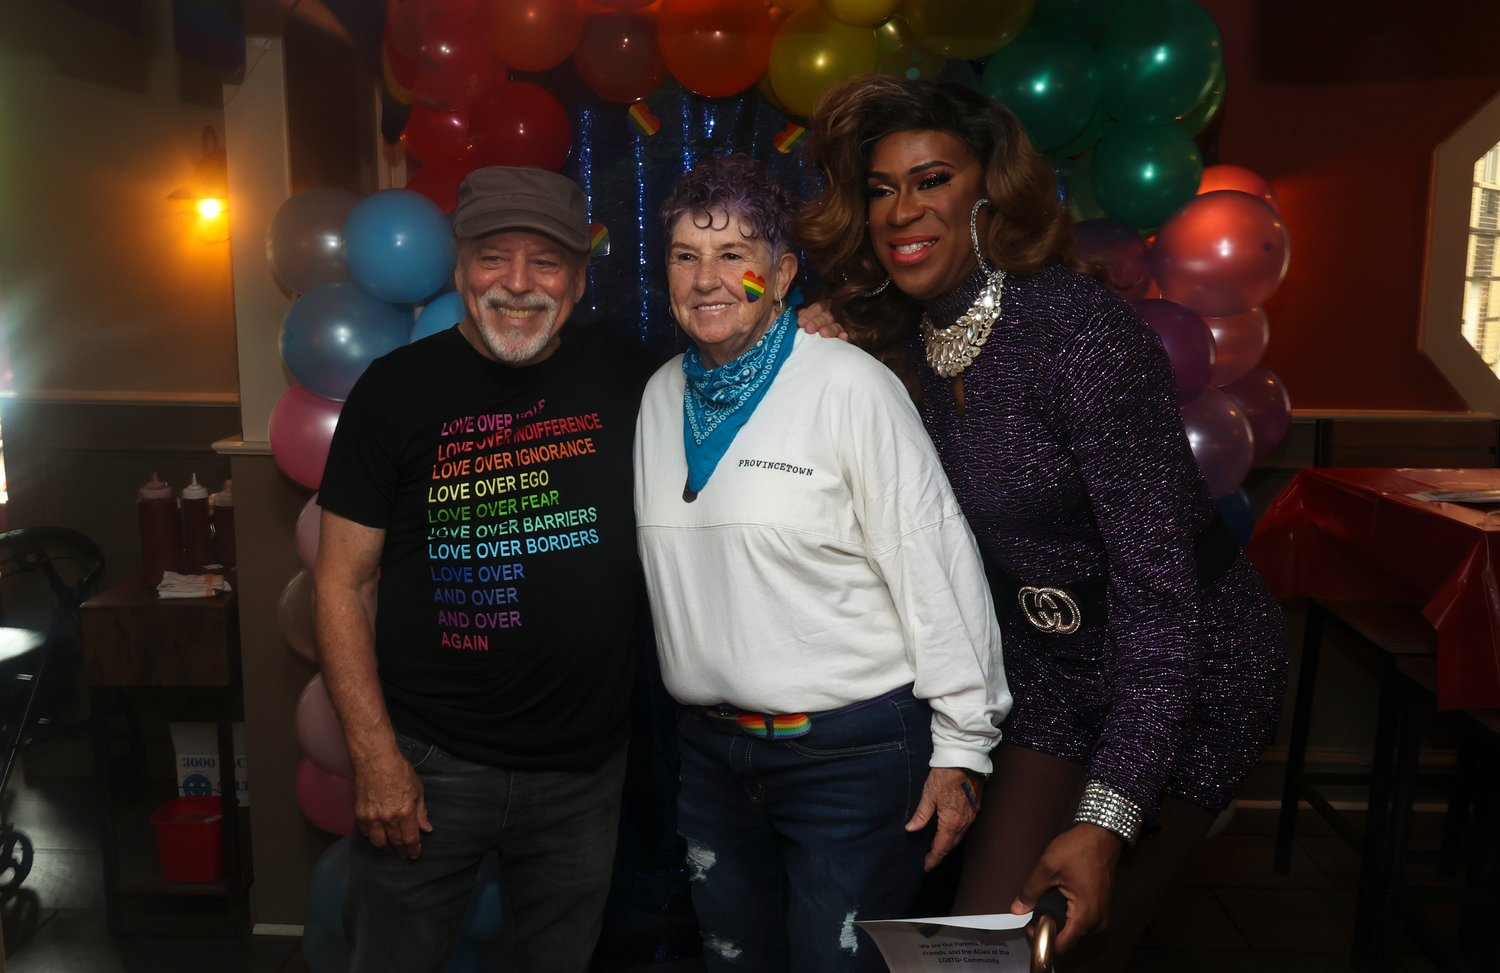 Jerry Goodman, Marcy Owens and Kelly Kaboom celebrate pride month at the Bronx Burger House in the Bronx, New York June 12.